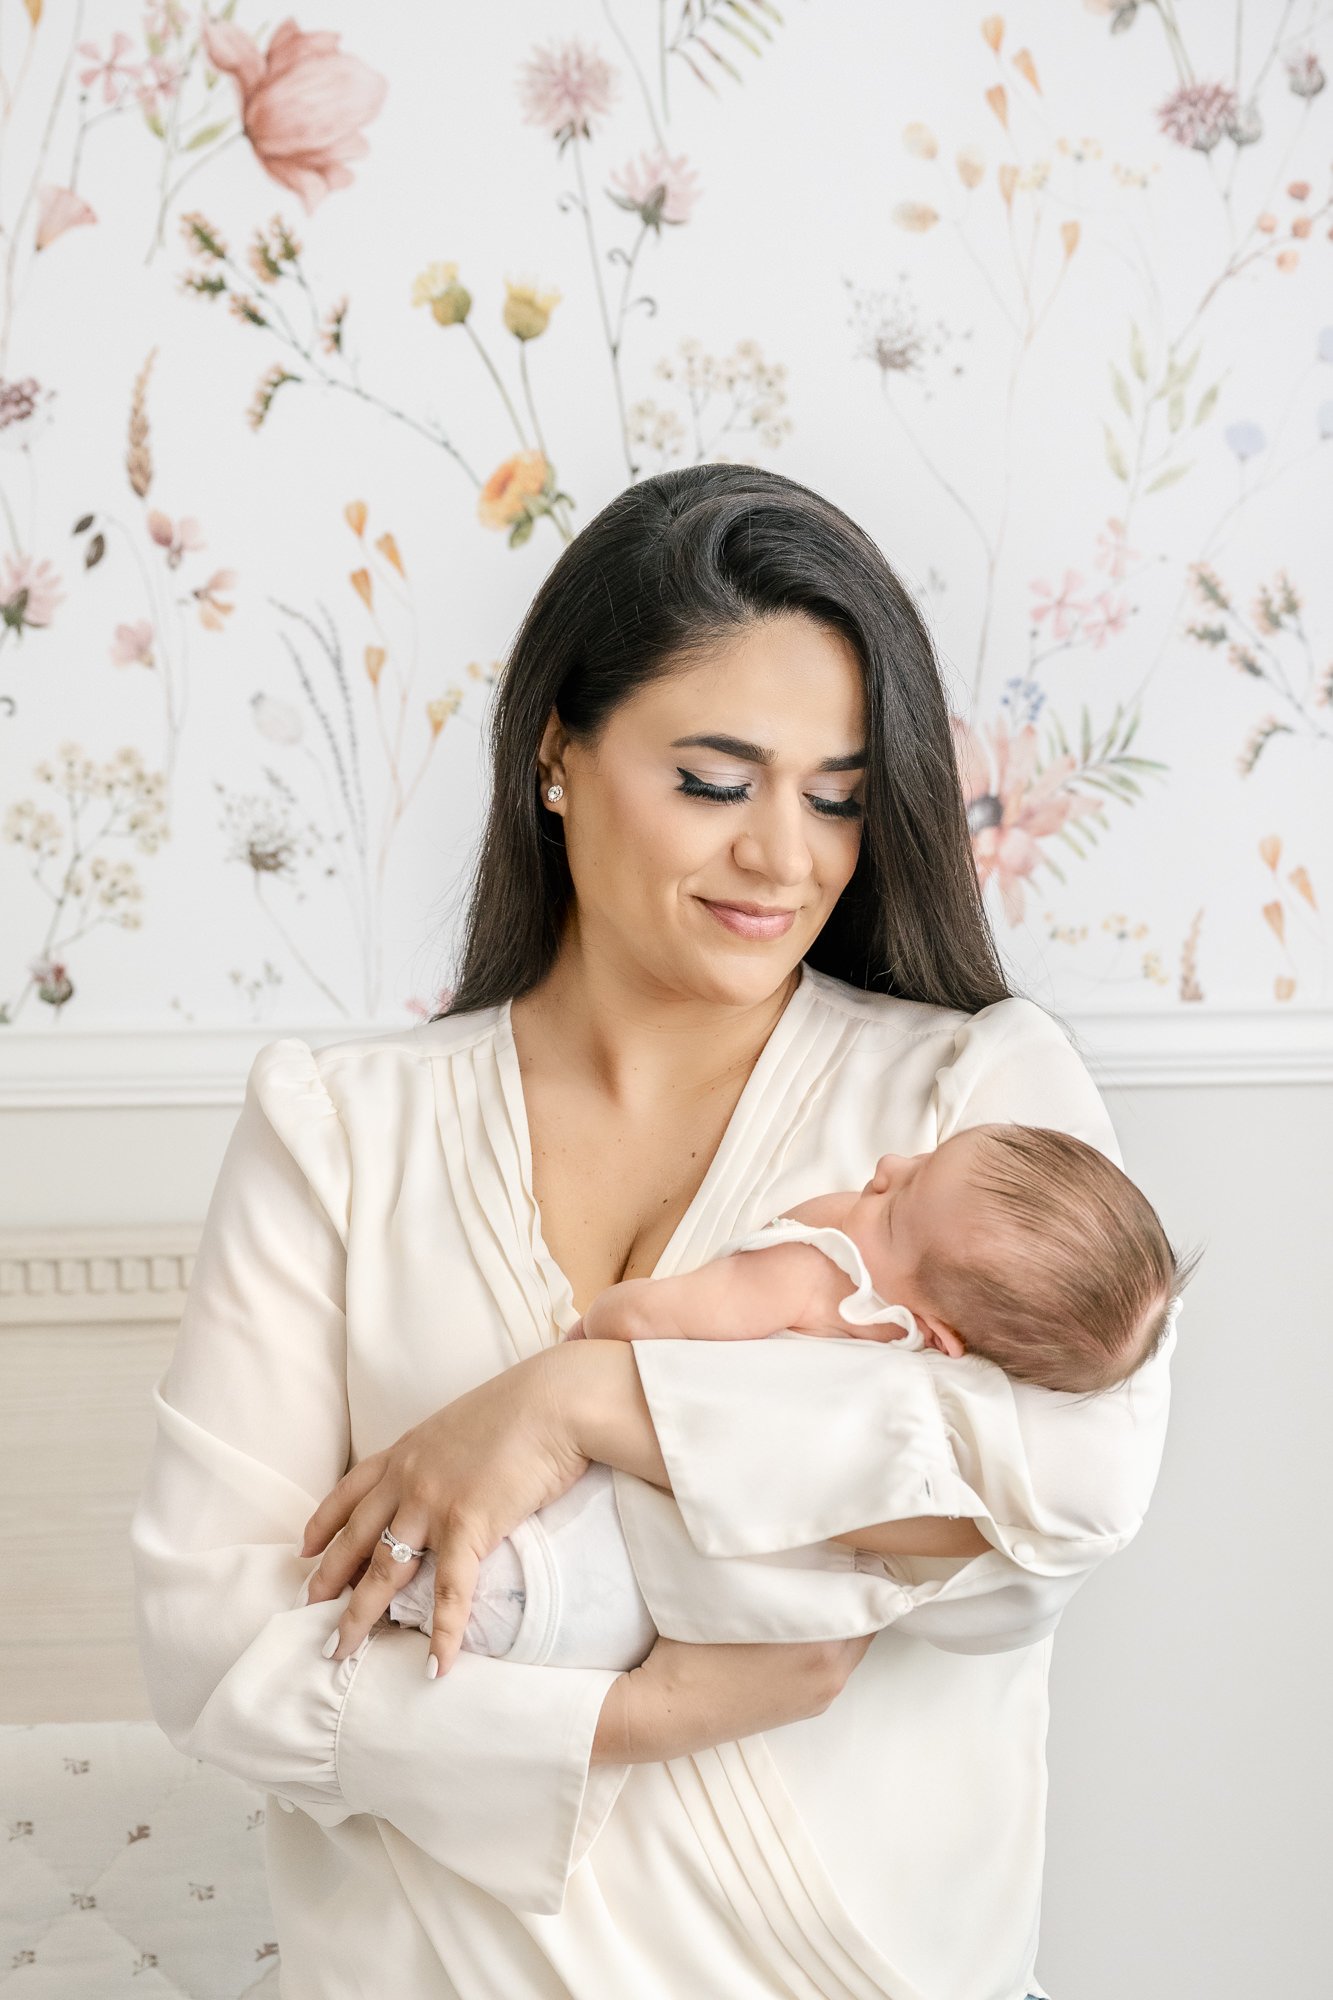  Young mom holds a newborn baby in a luxury nursery. The nursery wallpaper is a timeless floral design. Nicole Hawkins photography captures mom and baby during in-home newborn portrait session. #centralNewJerseyphotographer #inhomeportraits #newbornp